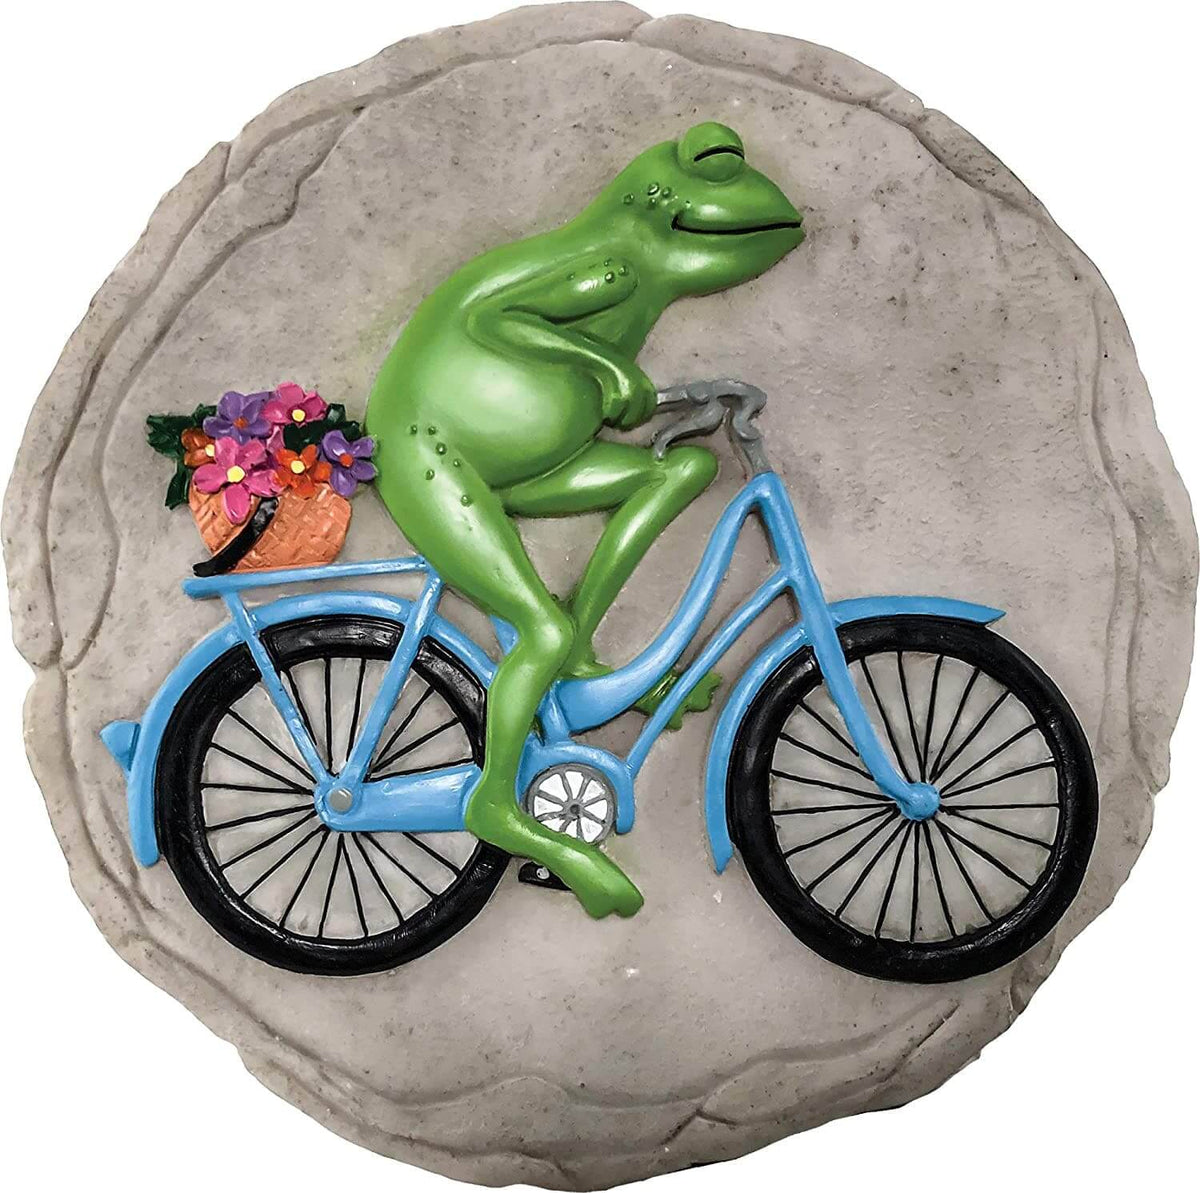 Green Frog on a Bicycle Decorative Garden Stone